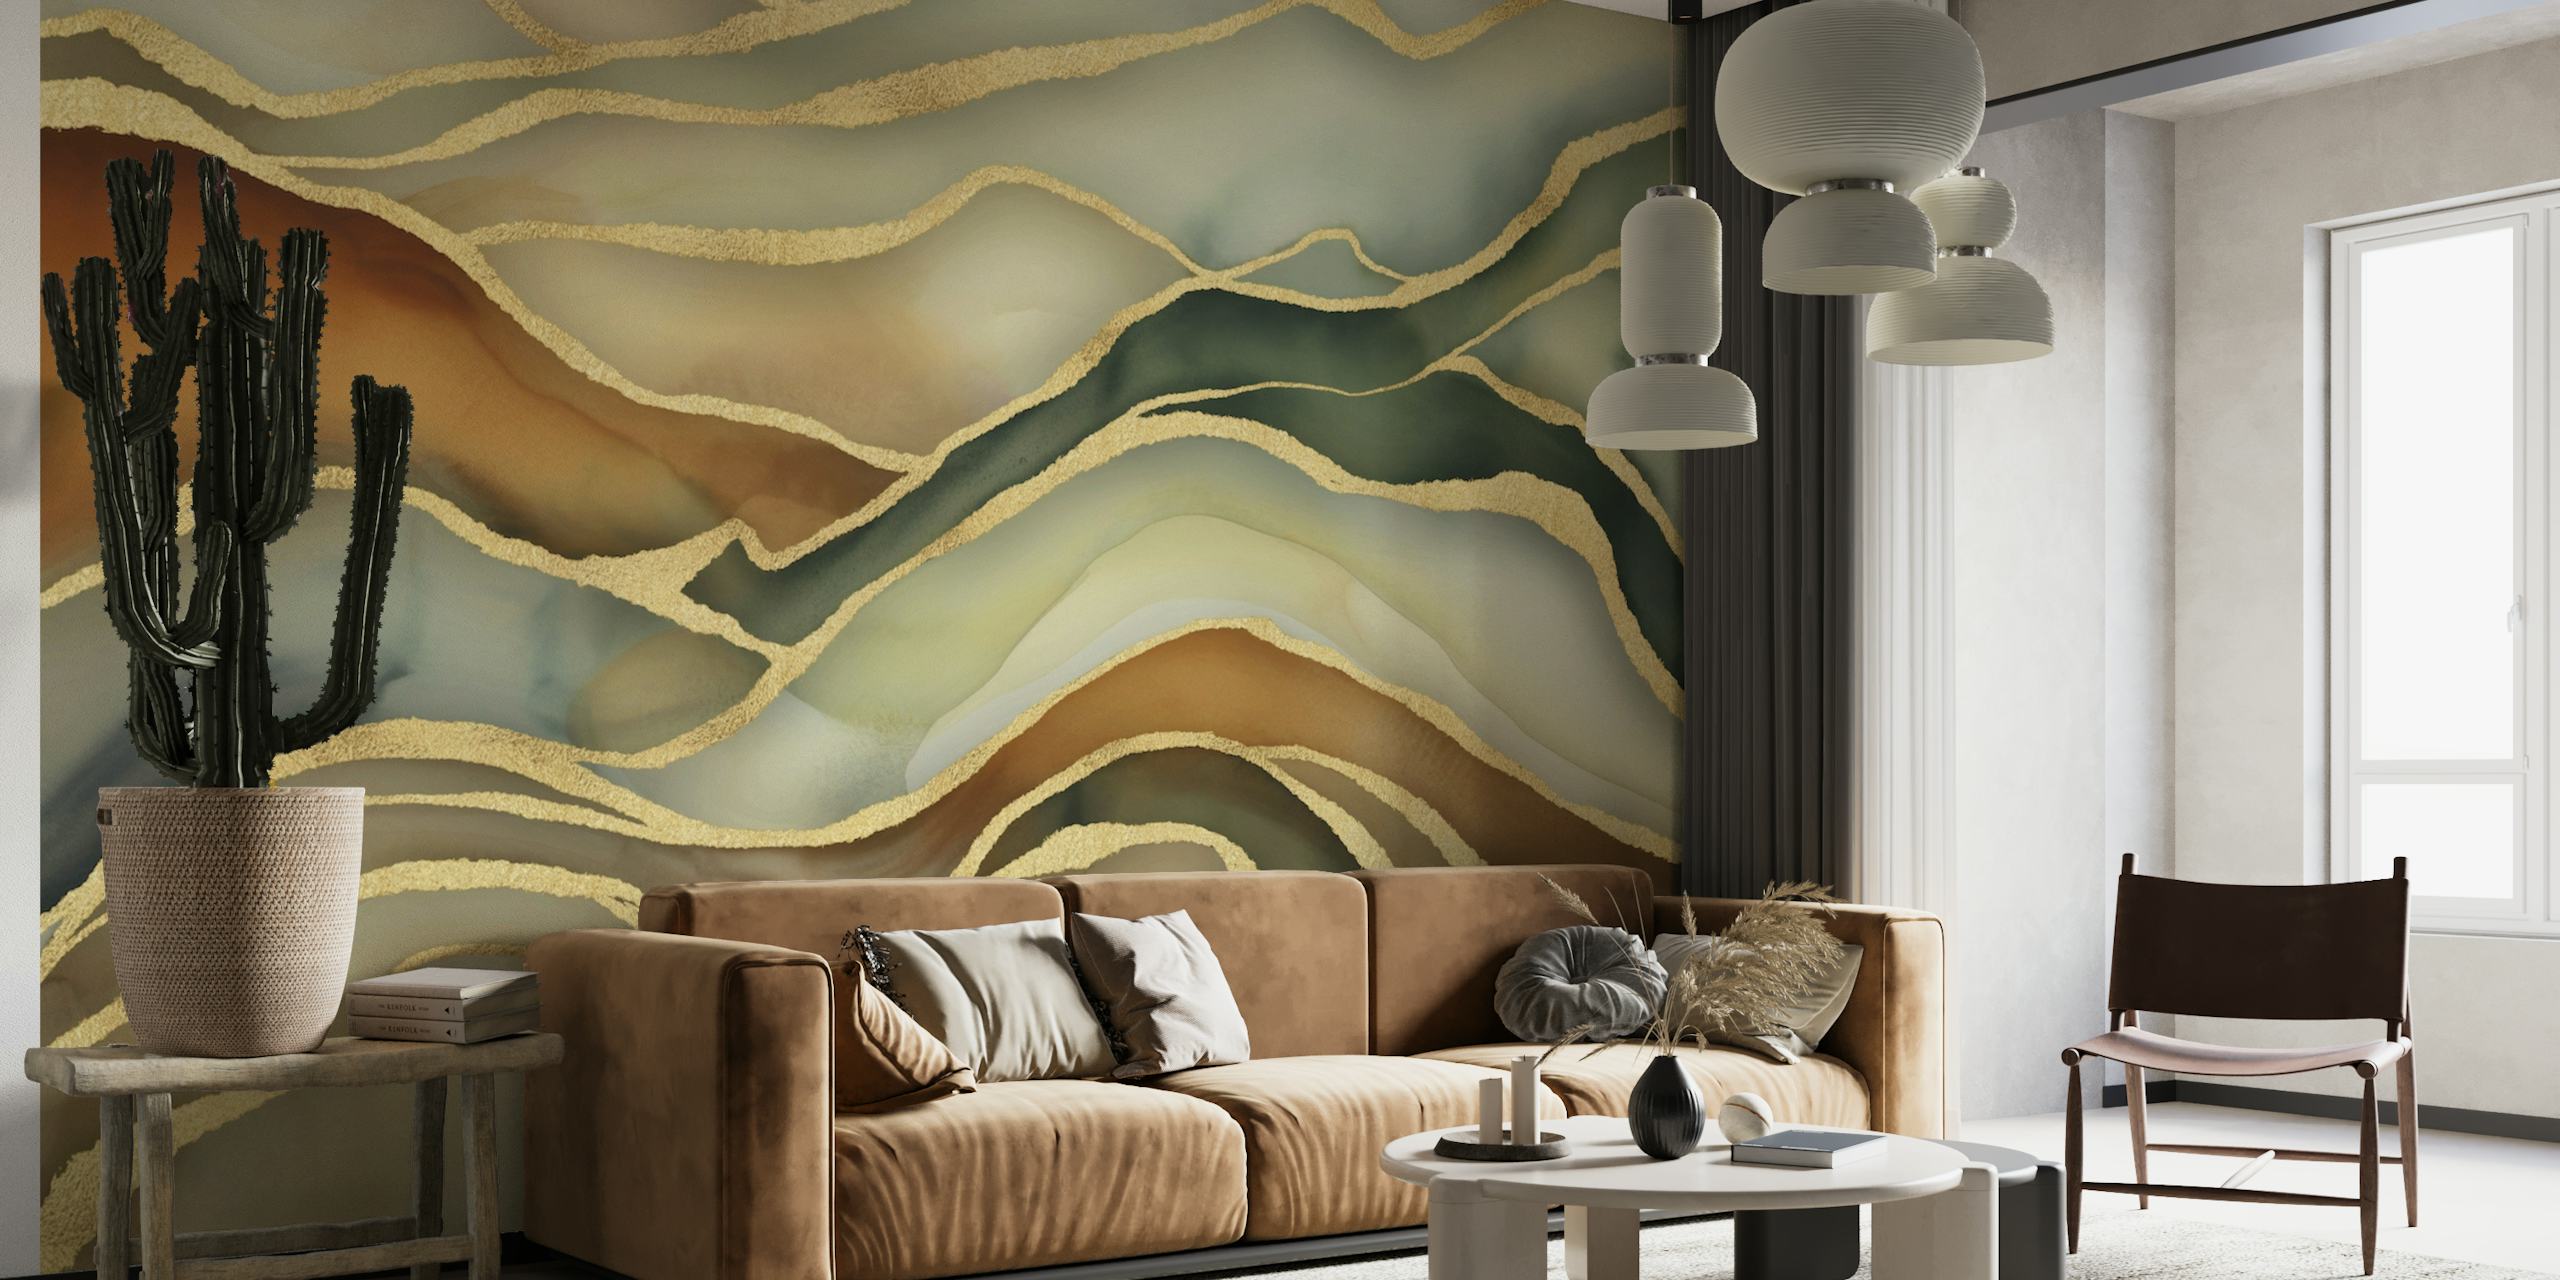 Abstract marble landscape wall mural in brown, green, and gold hues